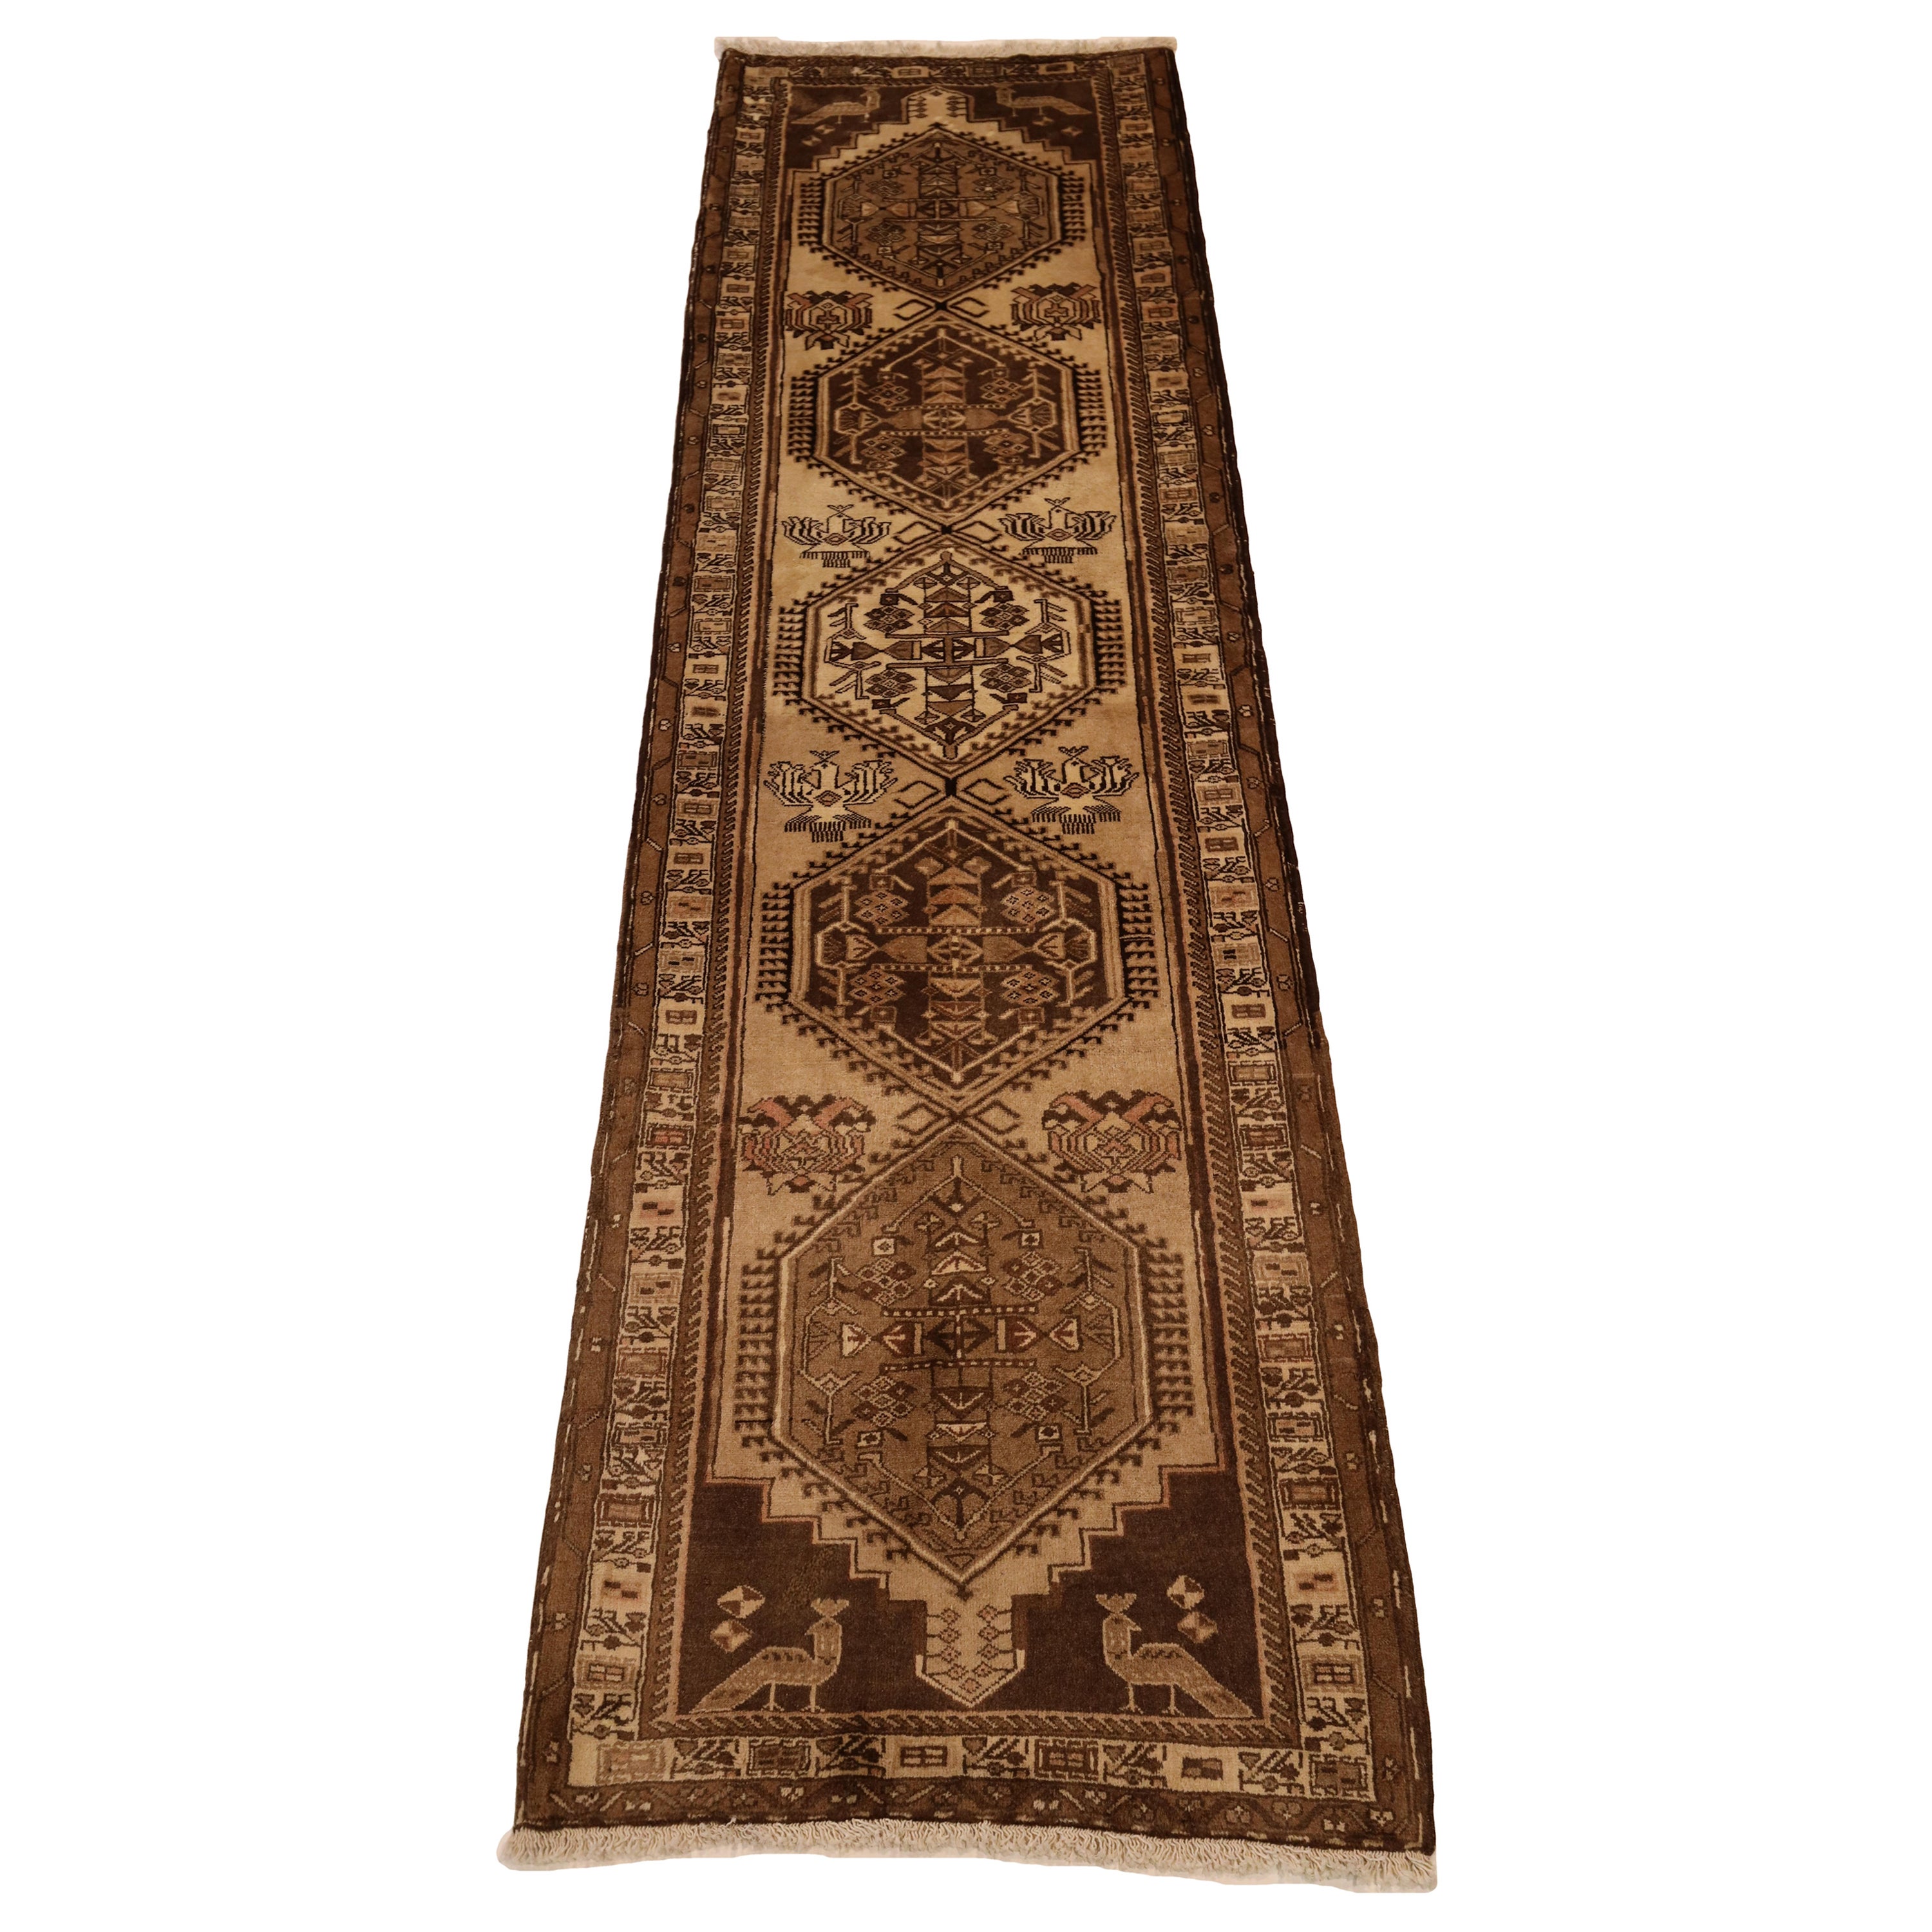 Antique-Washed Serab runner - 2'7" x 9'5" For Sale